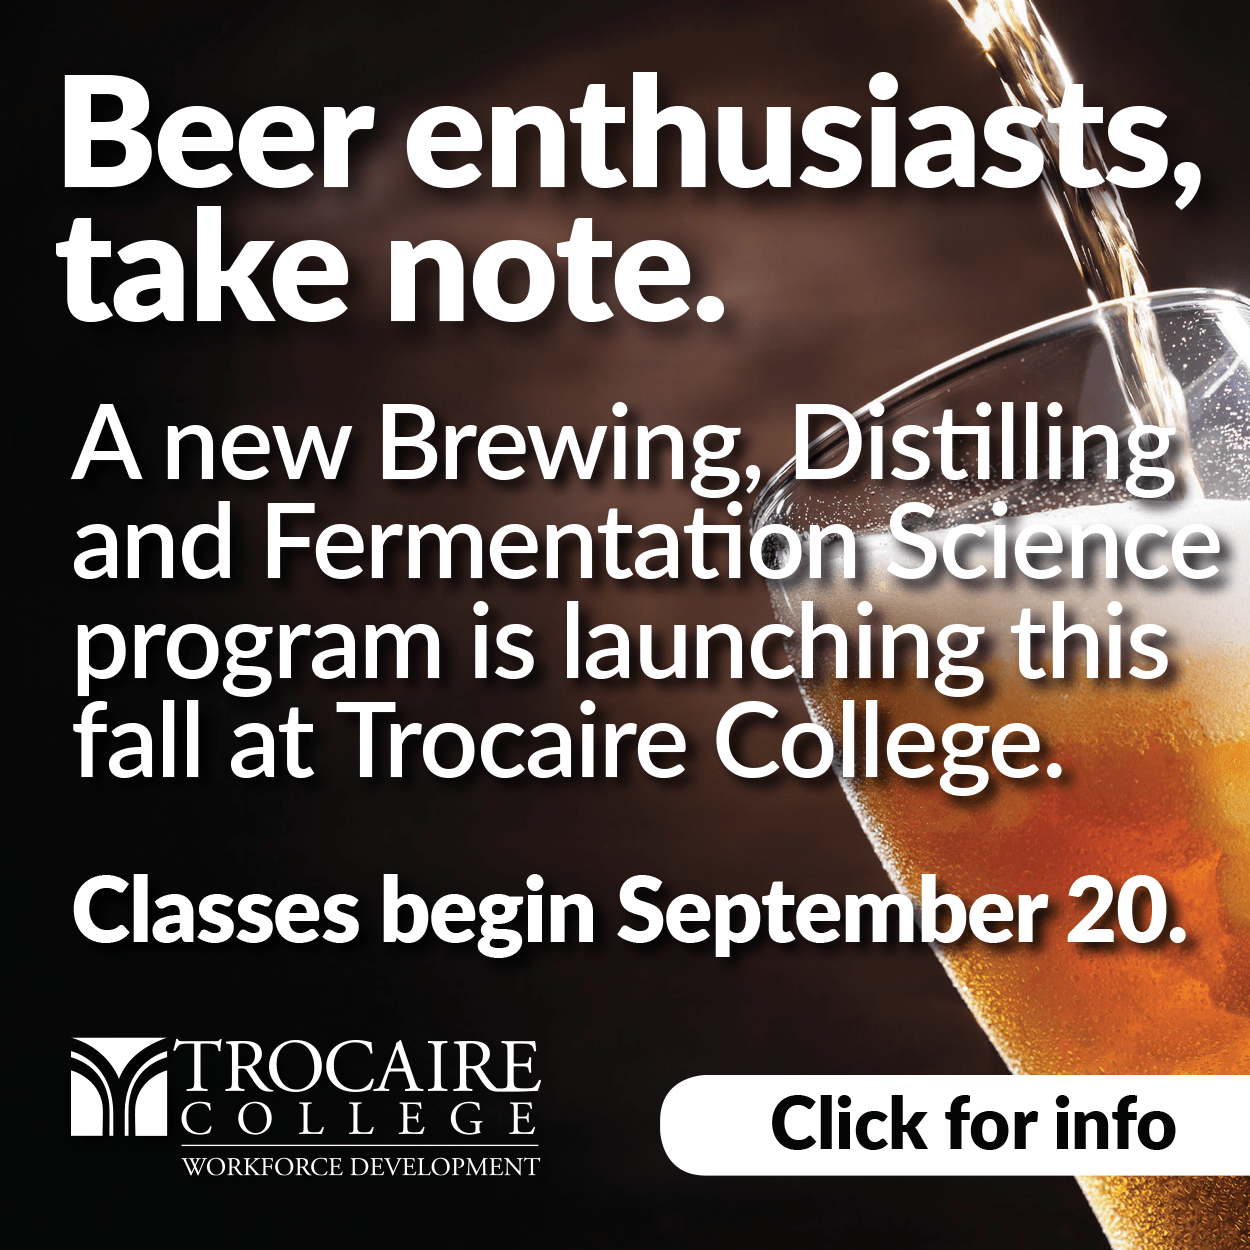 Trocaire College Launches Brewing, Distilling, and Fermentation Science Program